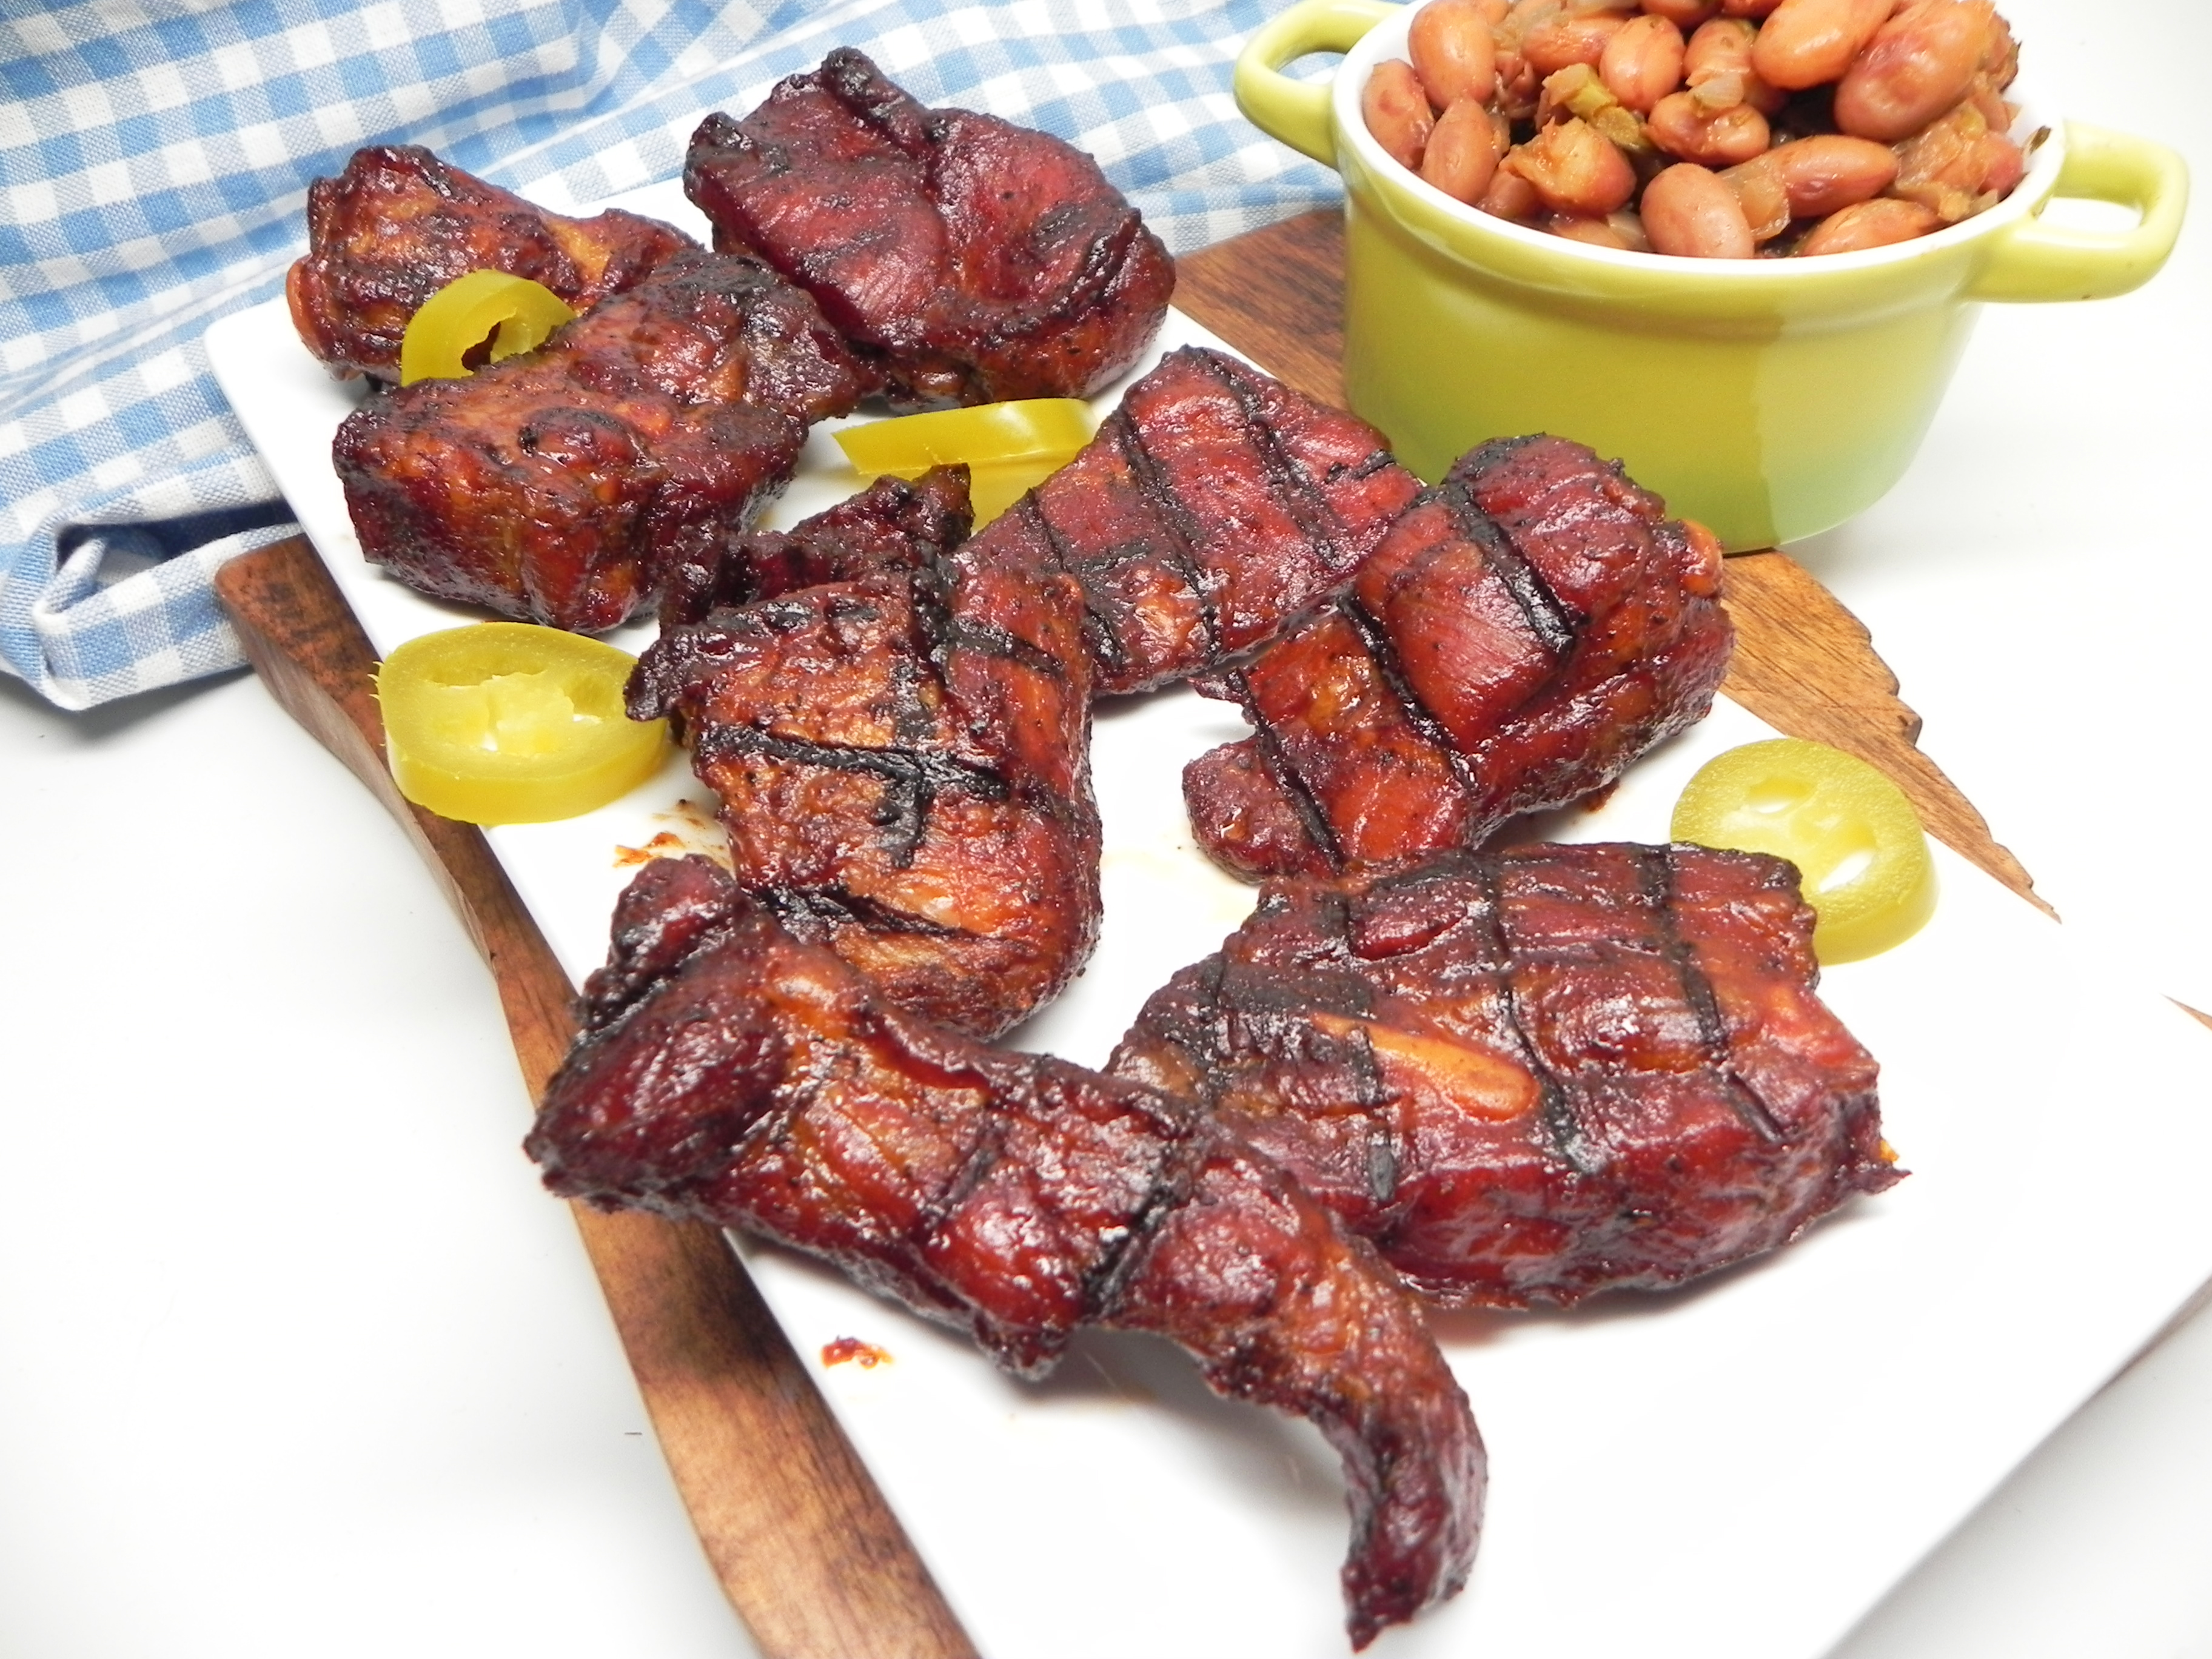 <p>Don't overlook the rib tips. Rib tips are the short, meaty sections of rib that are attached to the spareribs and are cut off when the ribs are trimmed St. Louis style. They are just as delicious as traditional ribs, but cook in less time.  These smoked rib tips are ready to serve in just 2 hours.</p>
                          